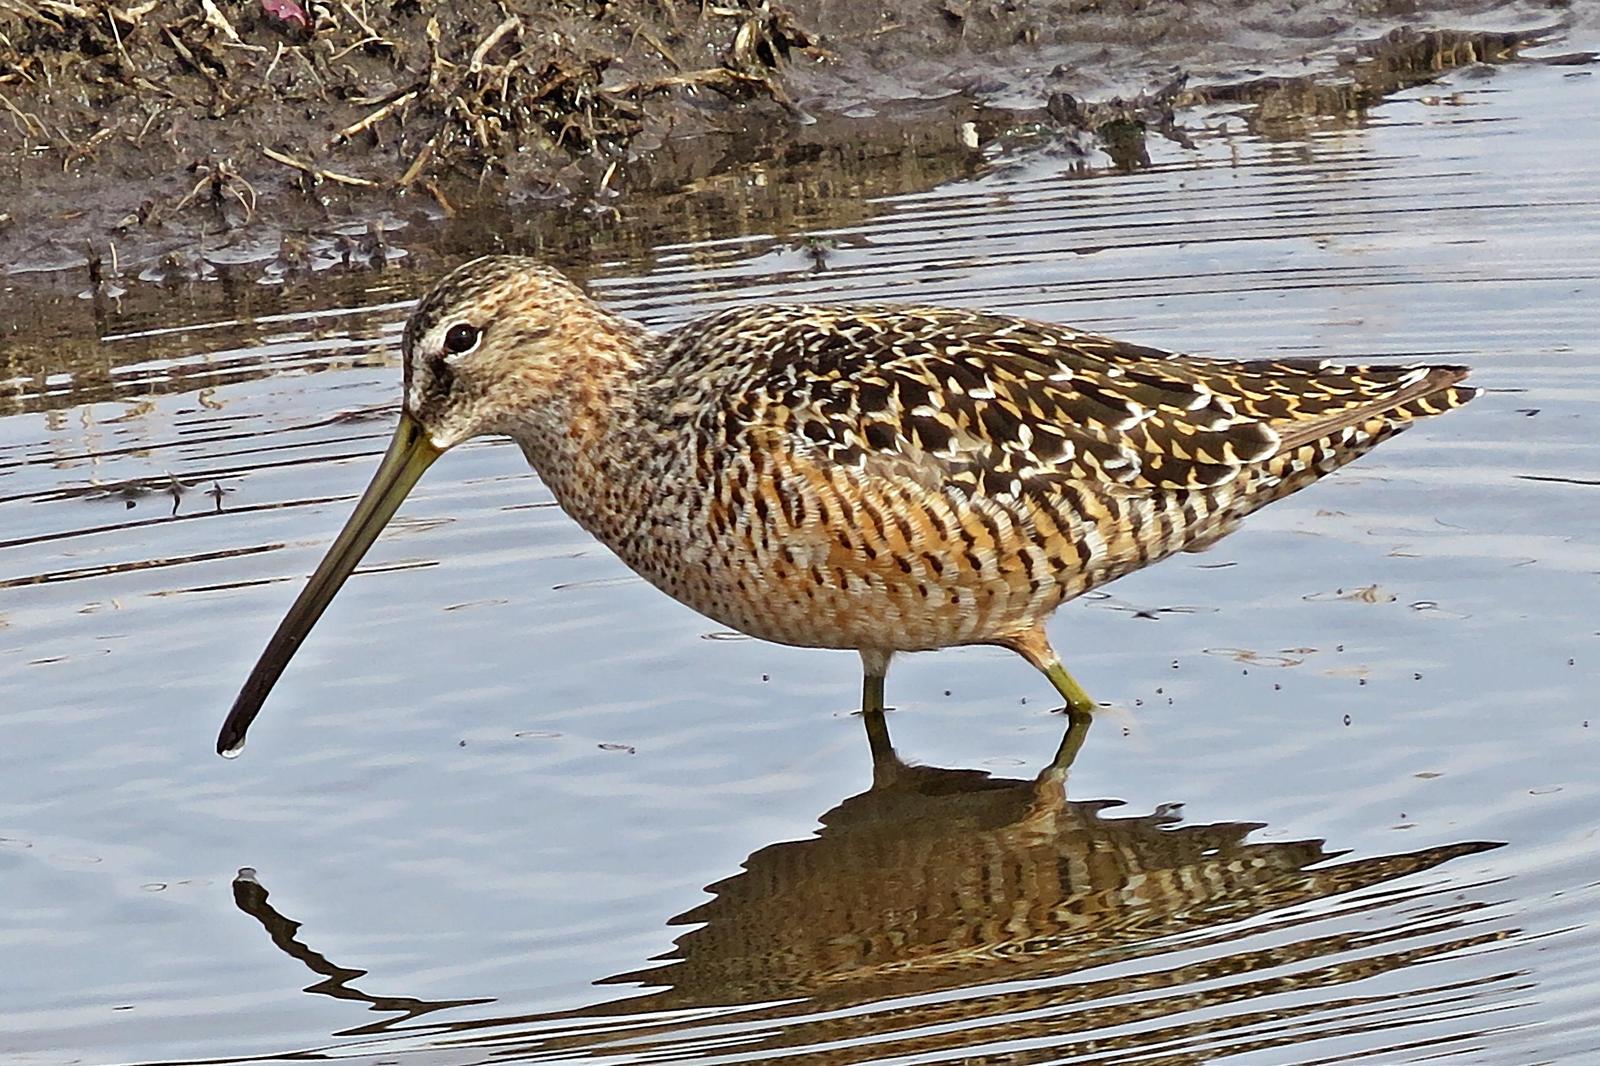 Long-billed Dowitcher Photo by Bob Neugebauer